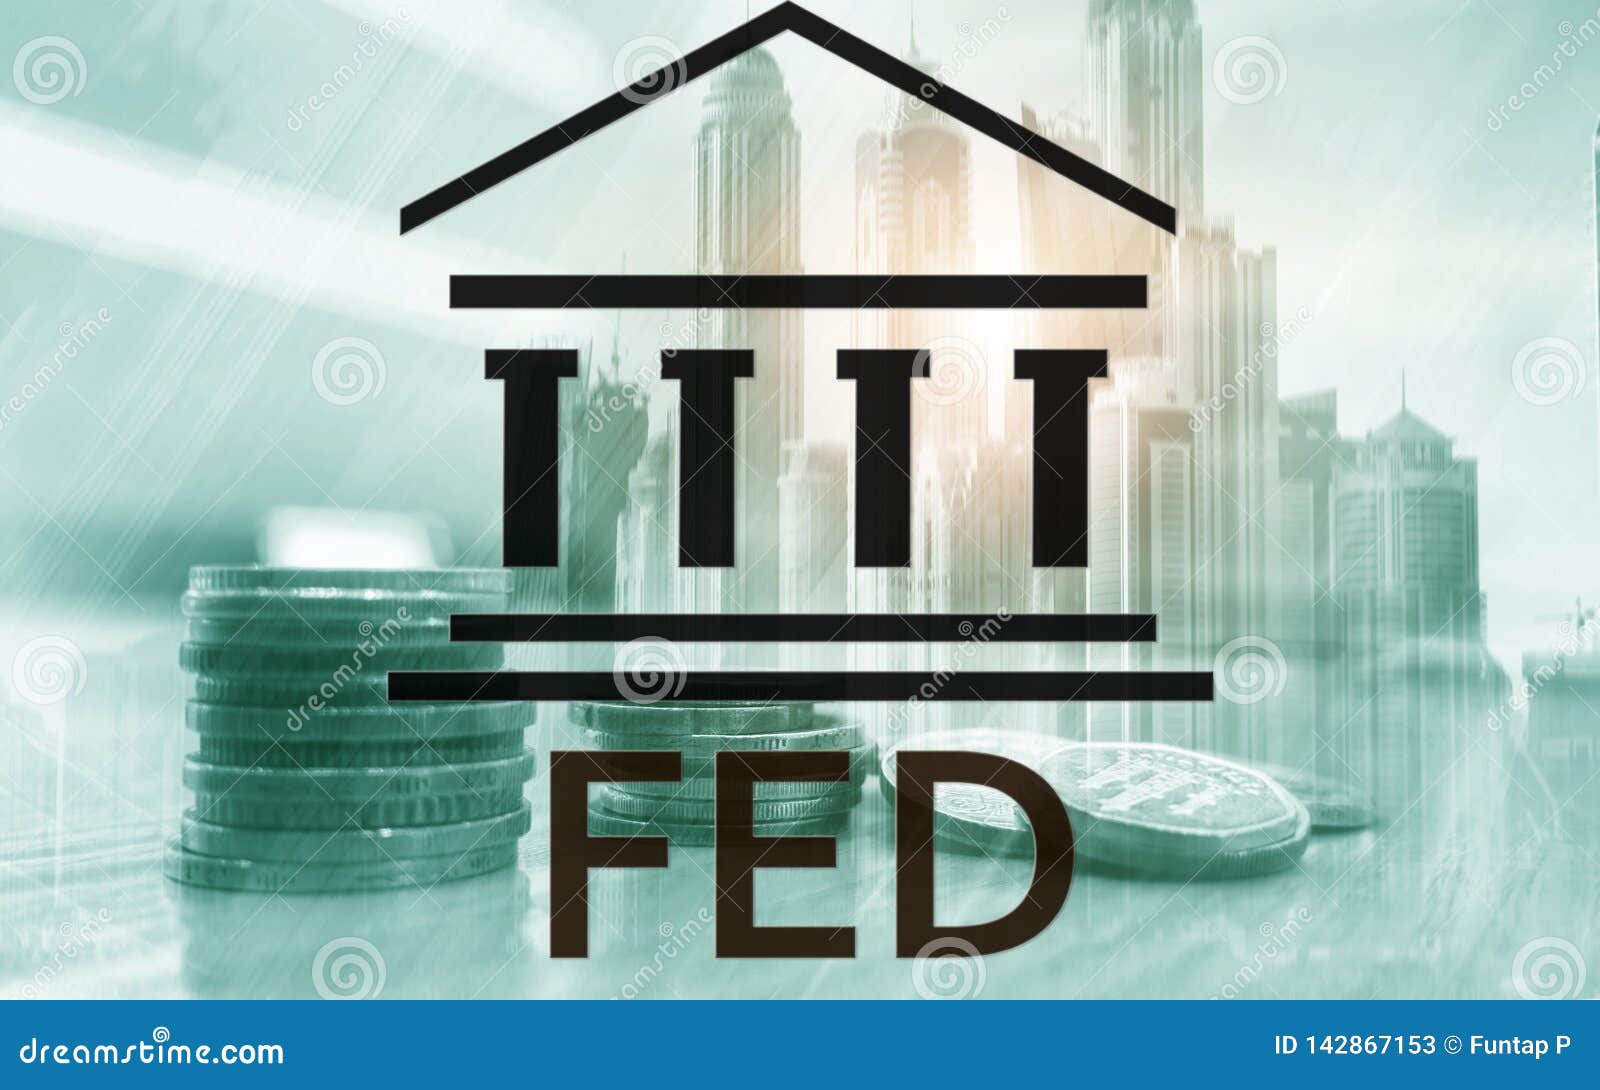 federal reserve system - fed. banking economy concept. double exposure background.